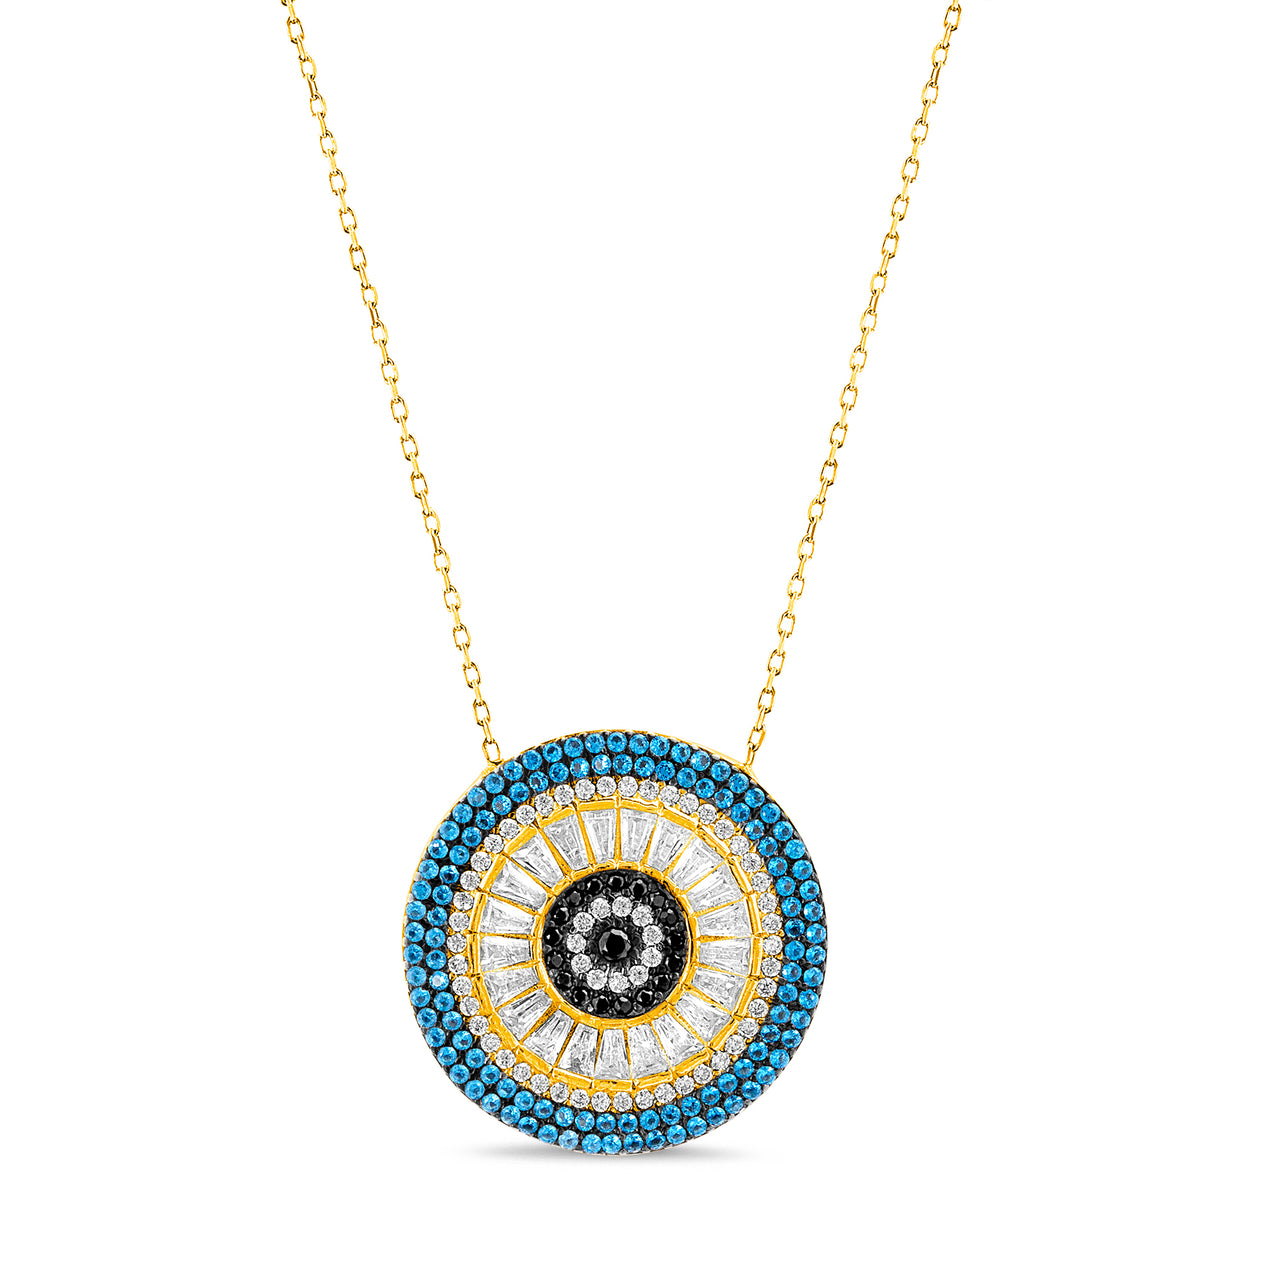 Lesa Michele Baguette Cut Cubic Zirconia Evil Eye Necklace in Yellow Gold Plated Sterling Silver